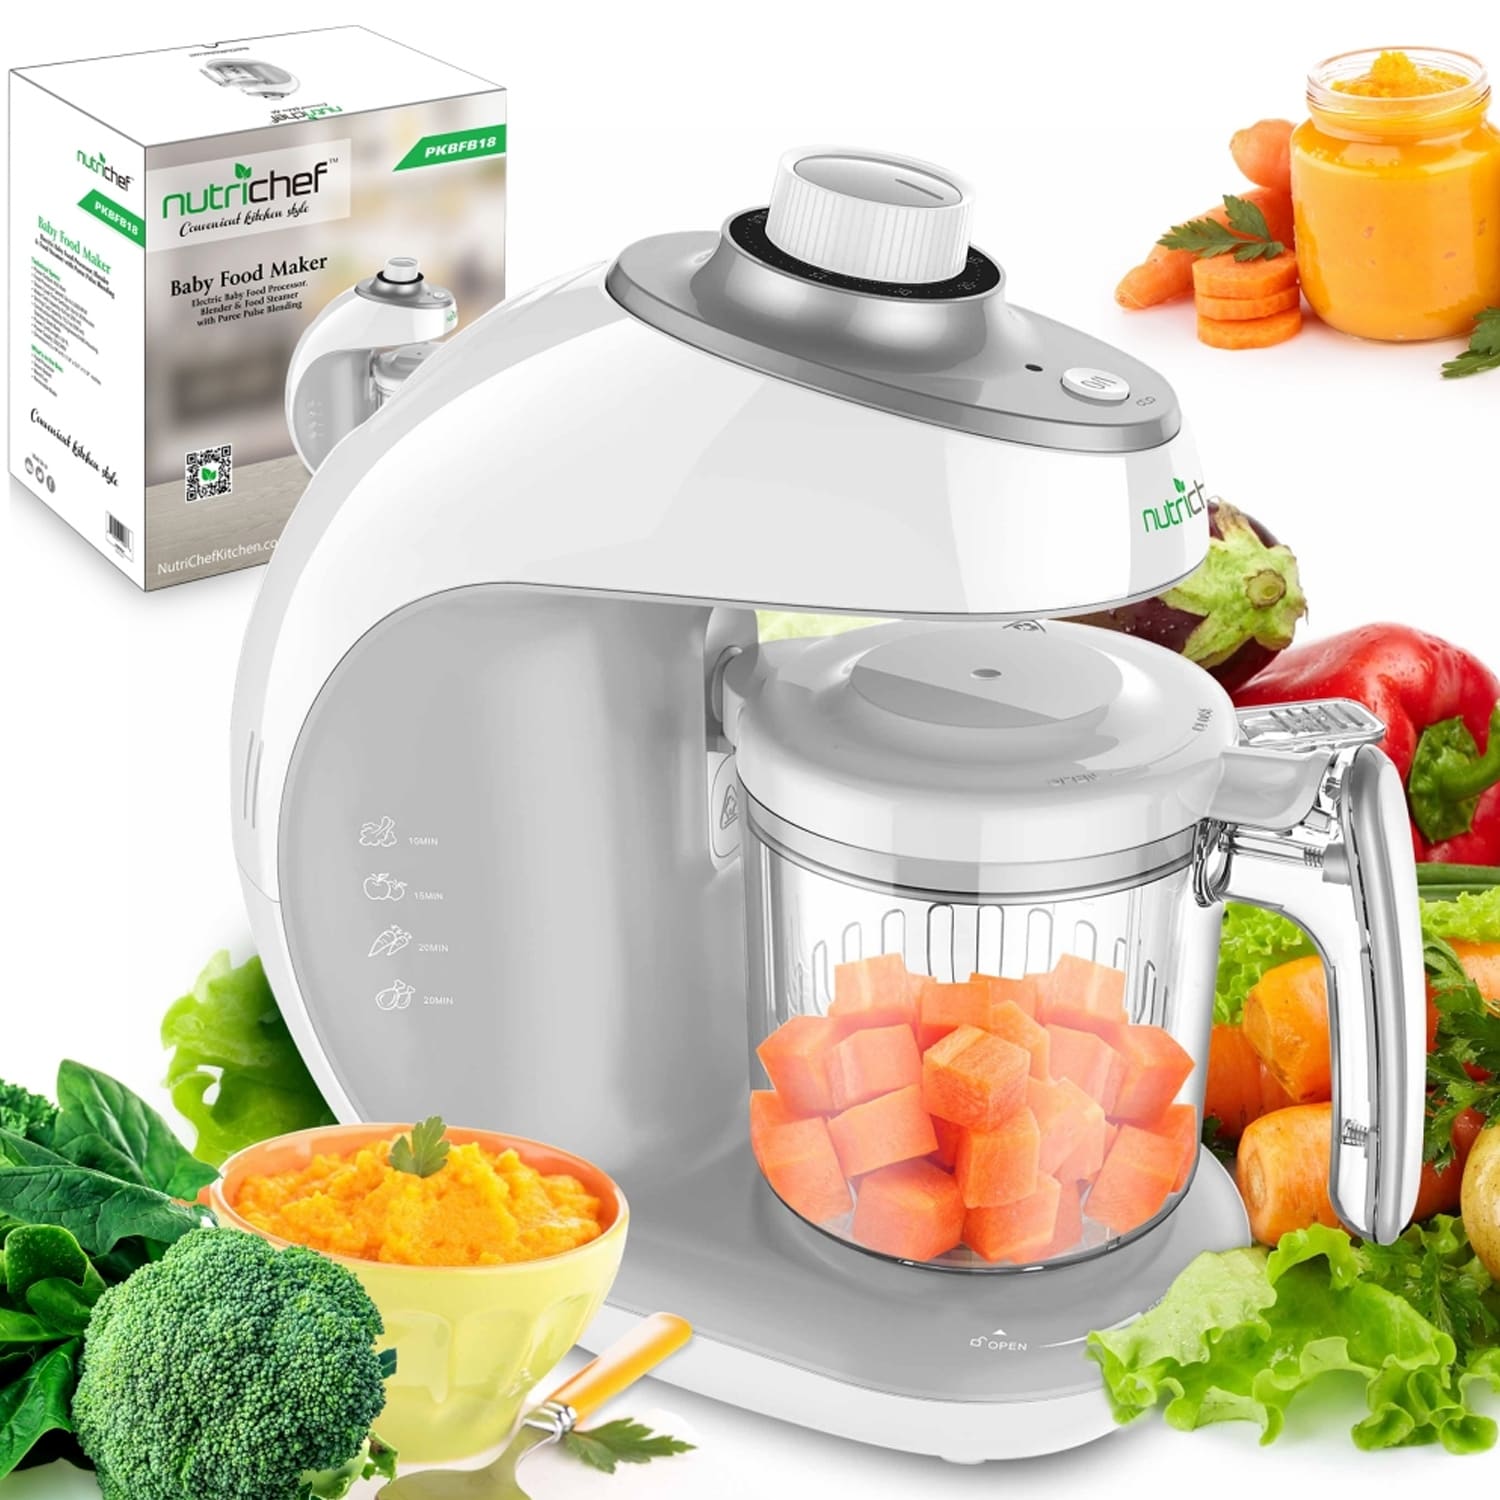 https://ak1.ostkcdn.com/images/products/is/images/direct/dc5ea25317f5dd9d5abc9aa55efa0e28601b78b8/NutriChef-Electric-Baby-Food-Maker-Puree-Food-Processor-Blender-Steamer-%282-Pack%29.jpg